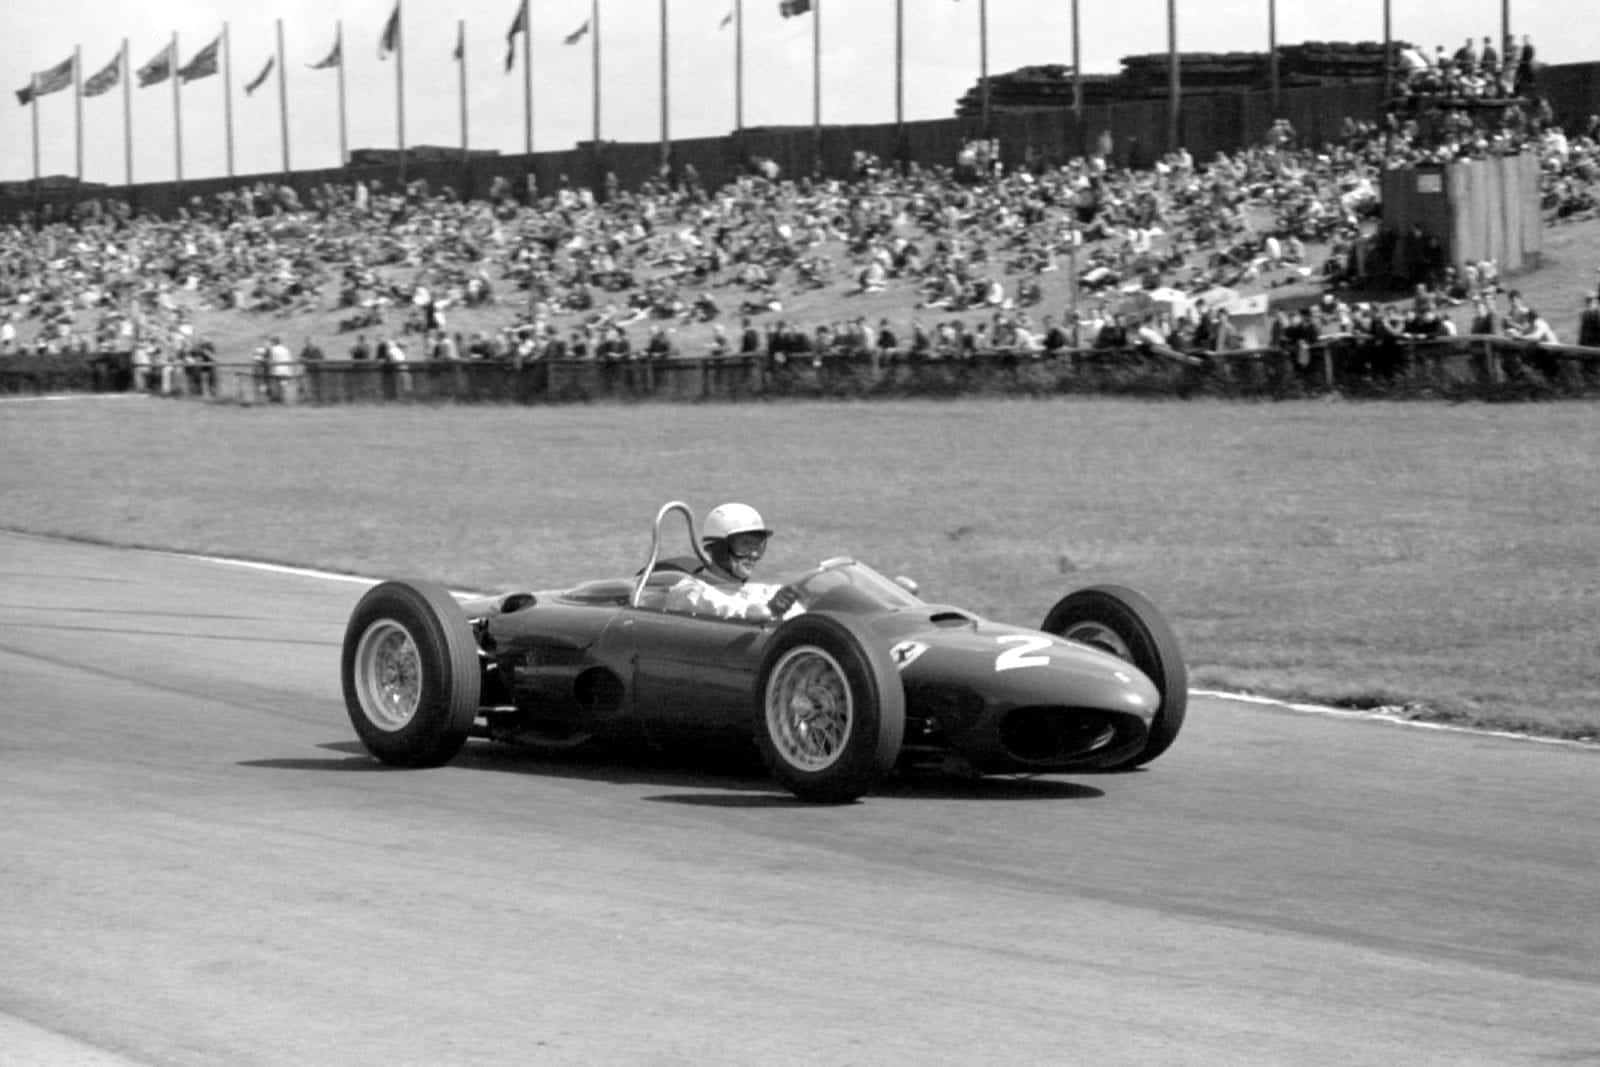 Phil Hill at Aintree in the 1962 British Grand Prix